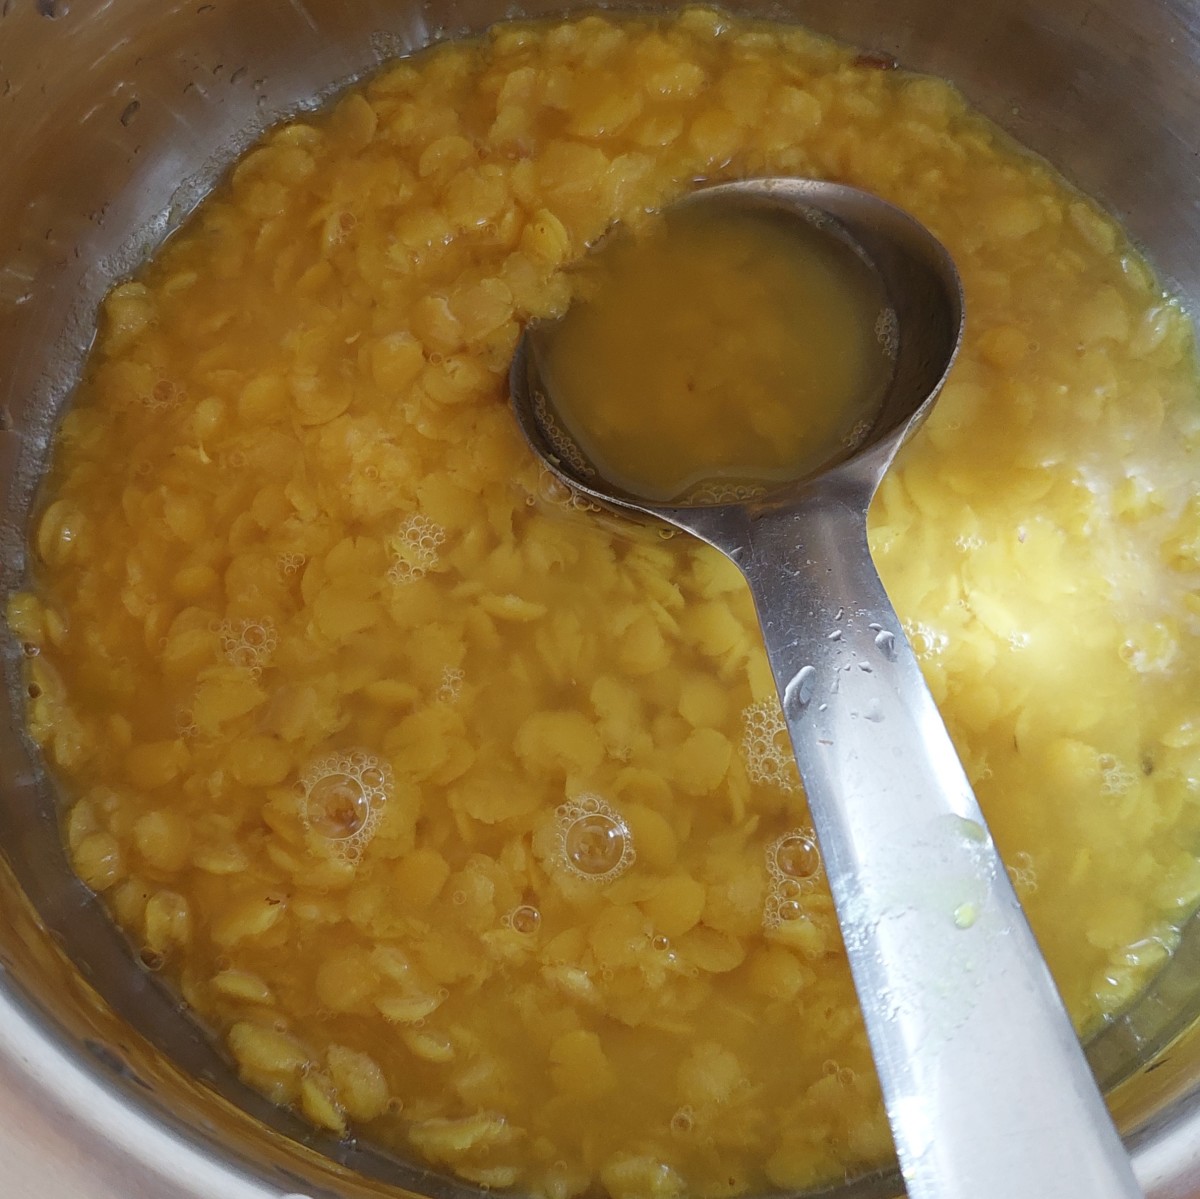 When the pressure of the cooker releases naturally, open the lid and transfer the lentils to a vessel. Mash the lentils until they are smooth with the back of a ladle or whisk.